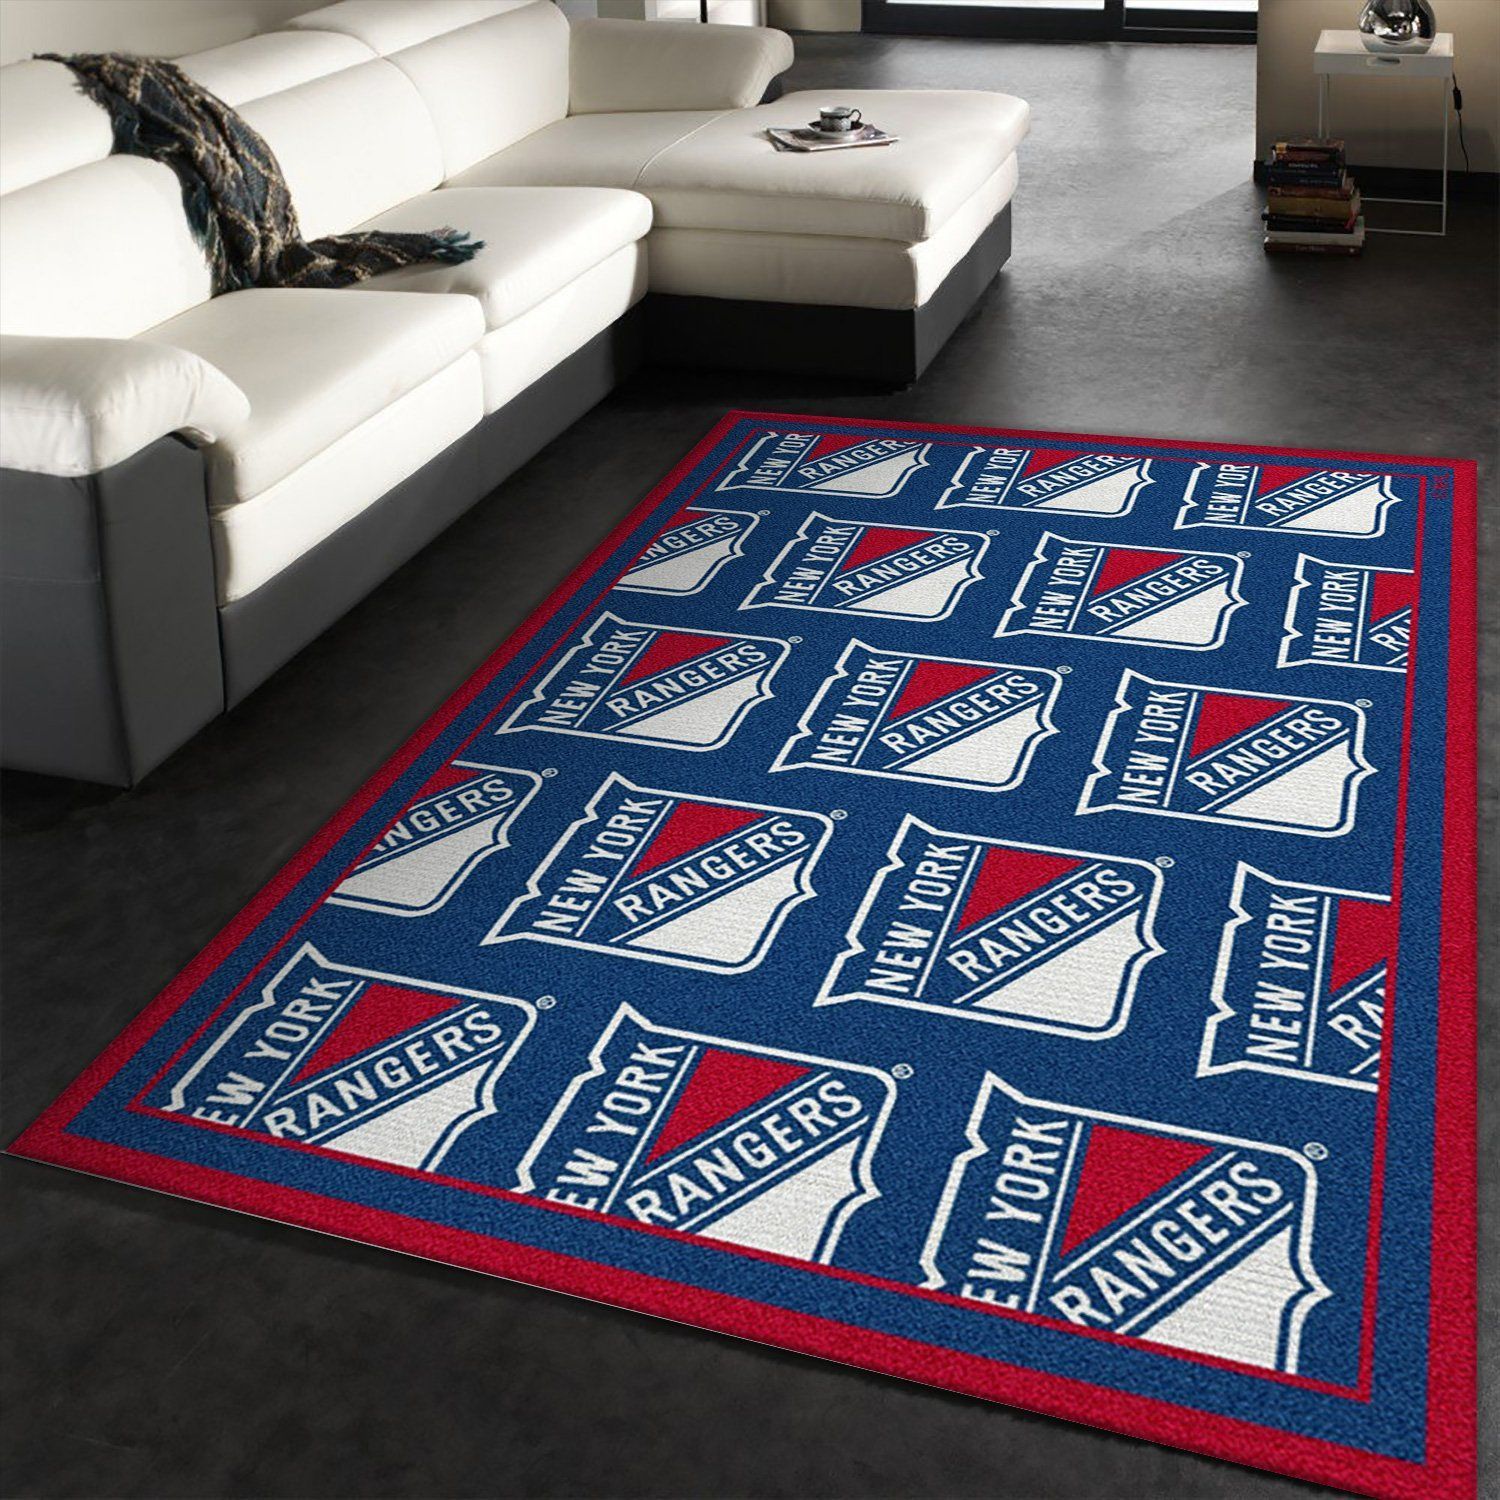 Nhl Repeat New York Rangers Area Rug, Living Room Rug, Home US Decor - Indoor Outdoor Rugs